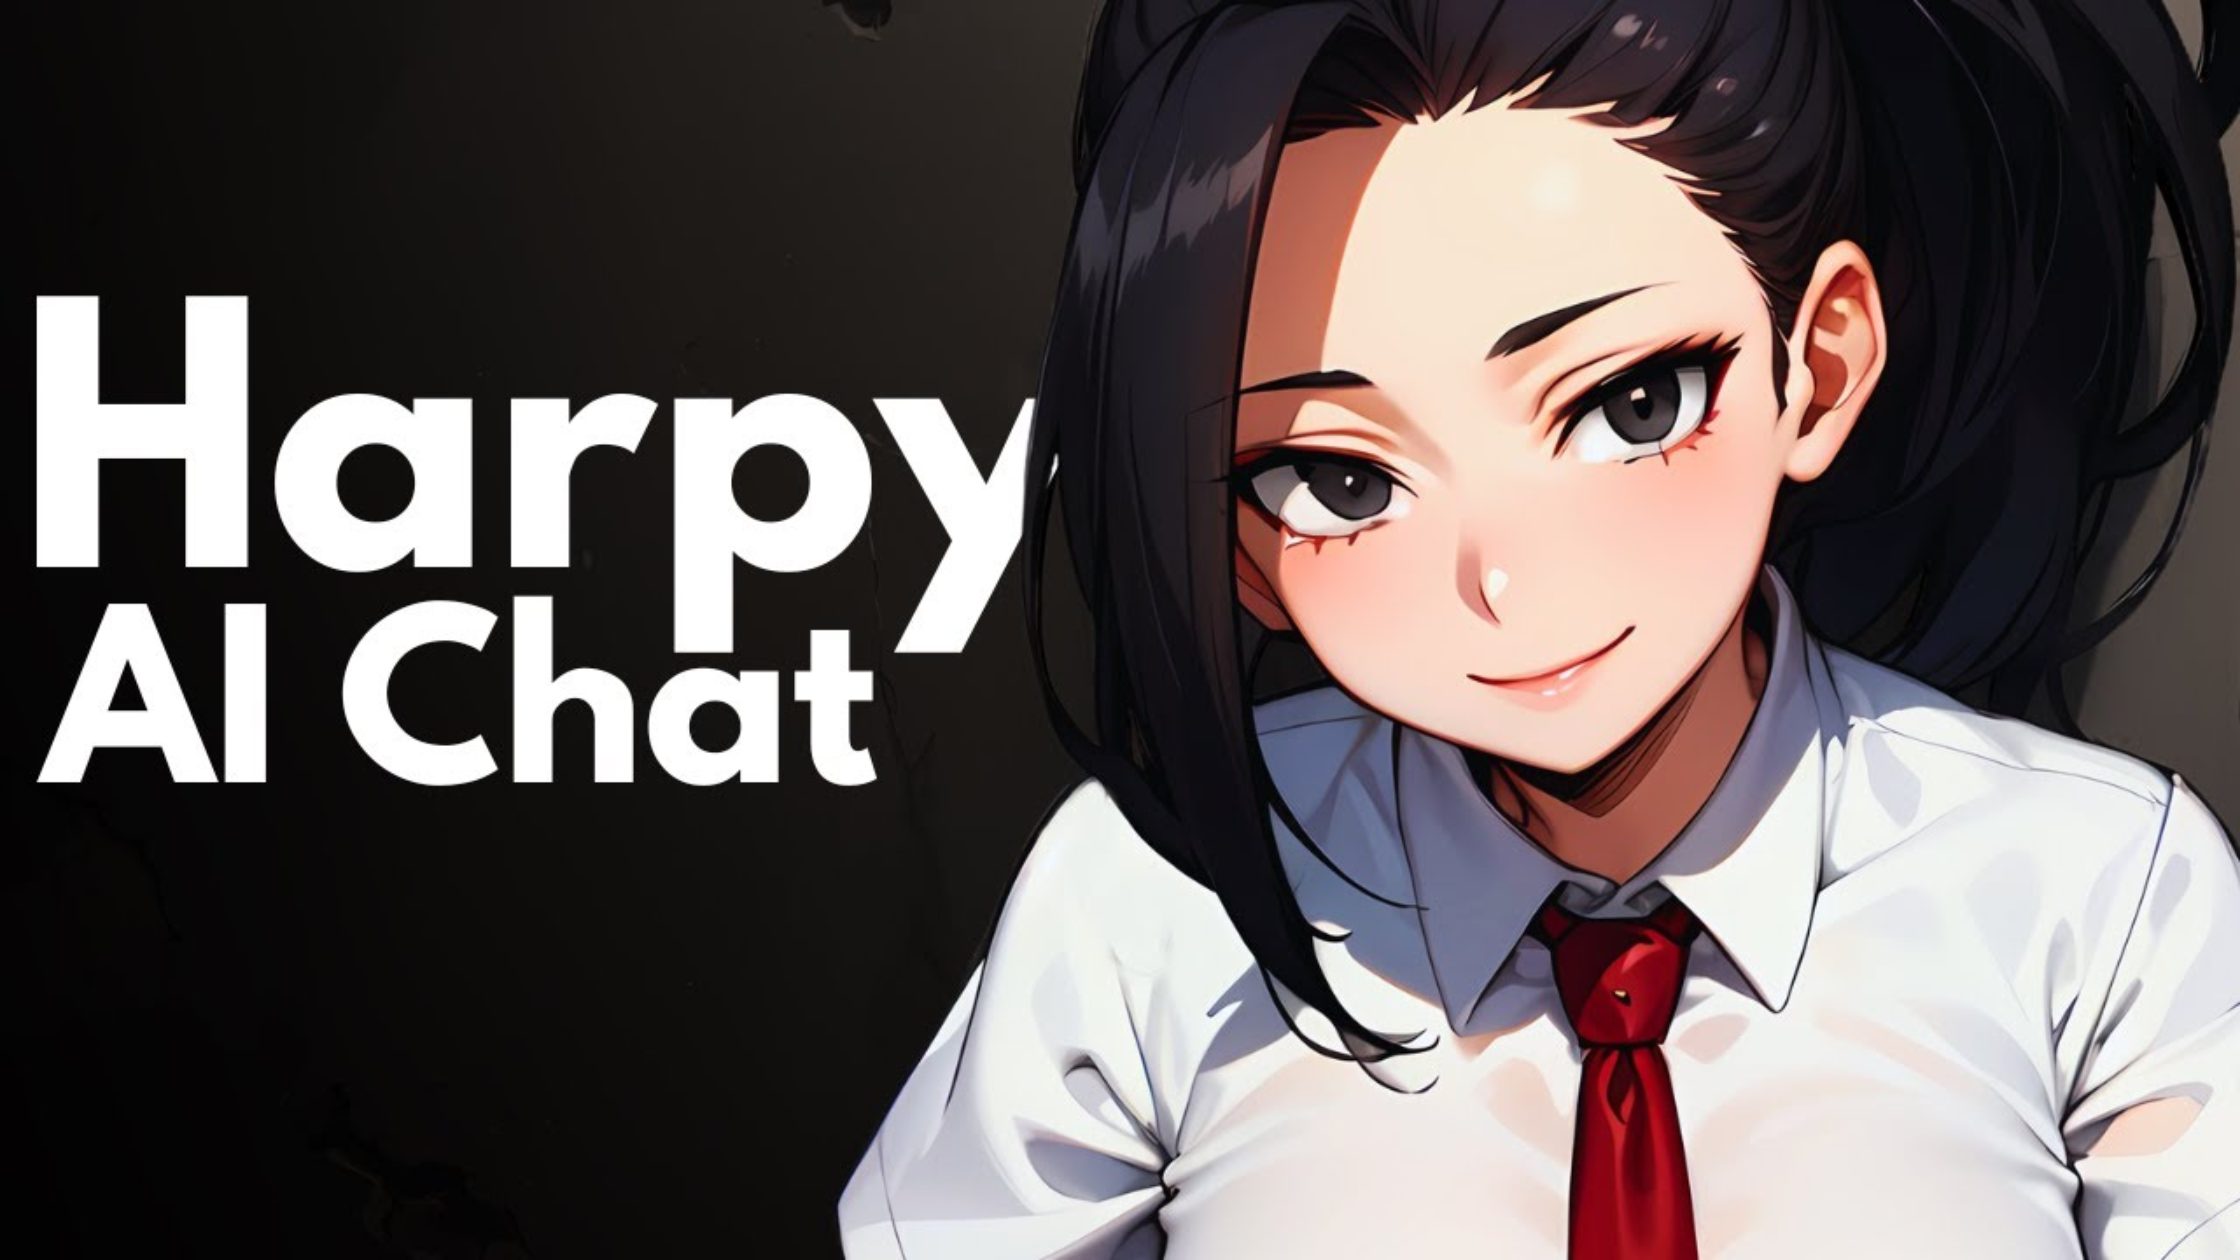 Harpy AI Chat Free Online